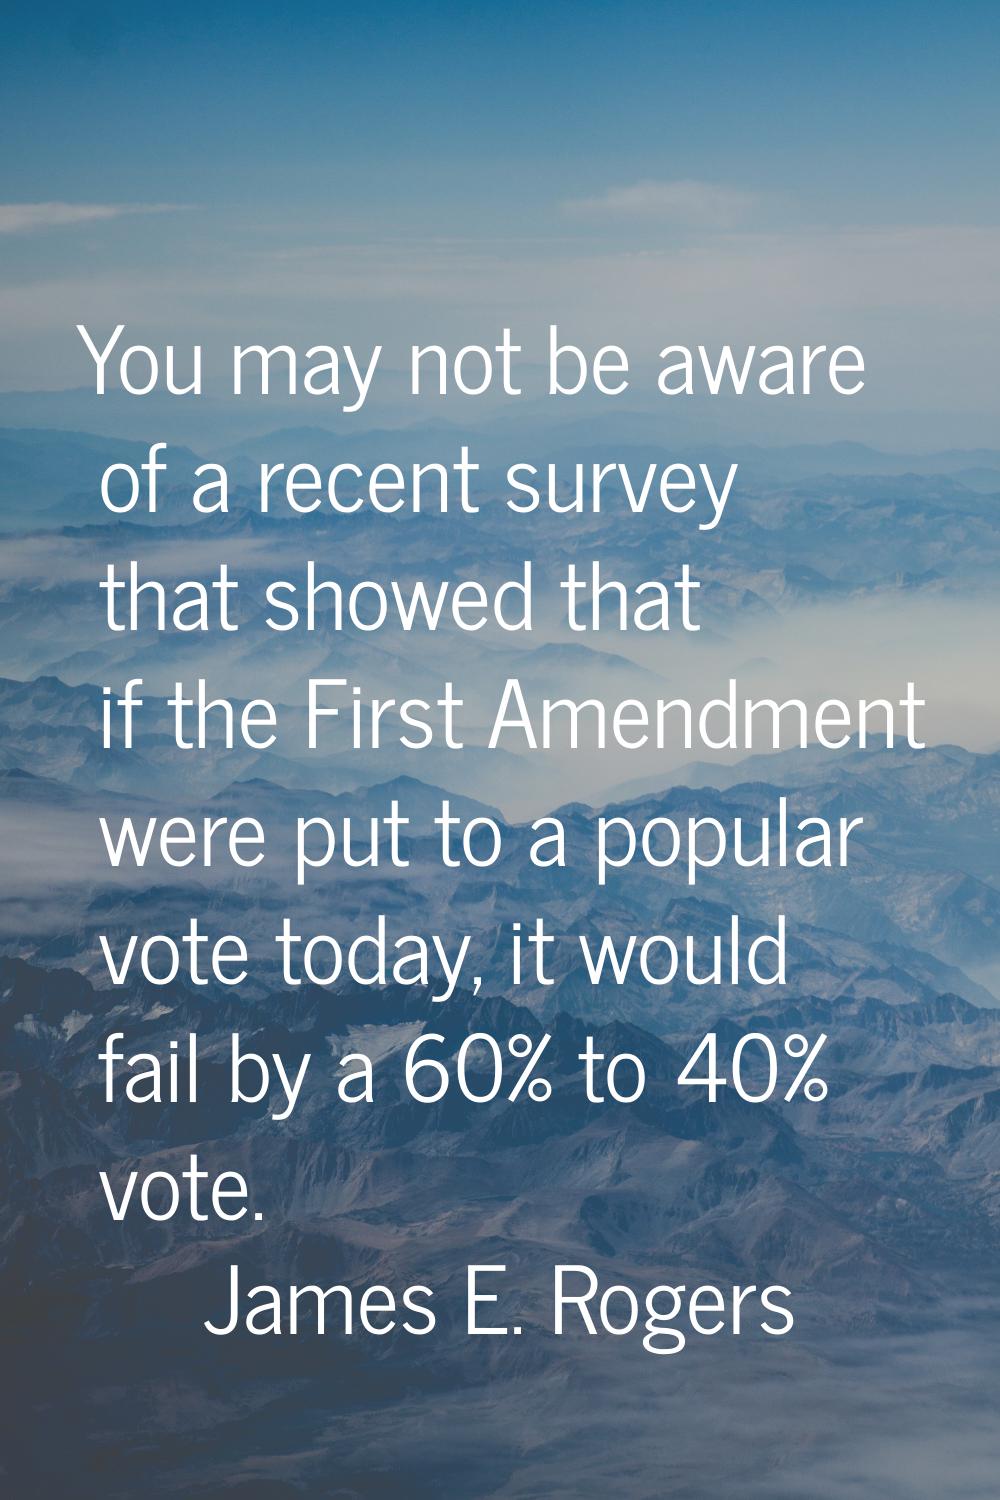 You may not be aware of a recent survey that showed that if the First Amendment were put to a popul